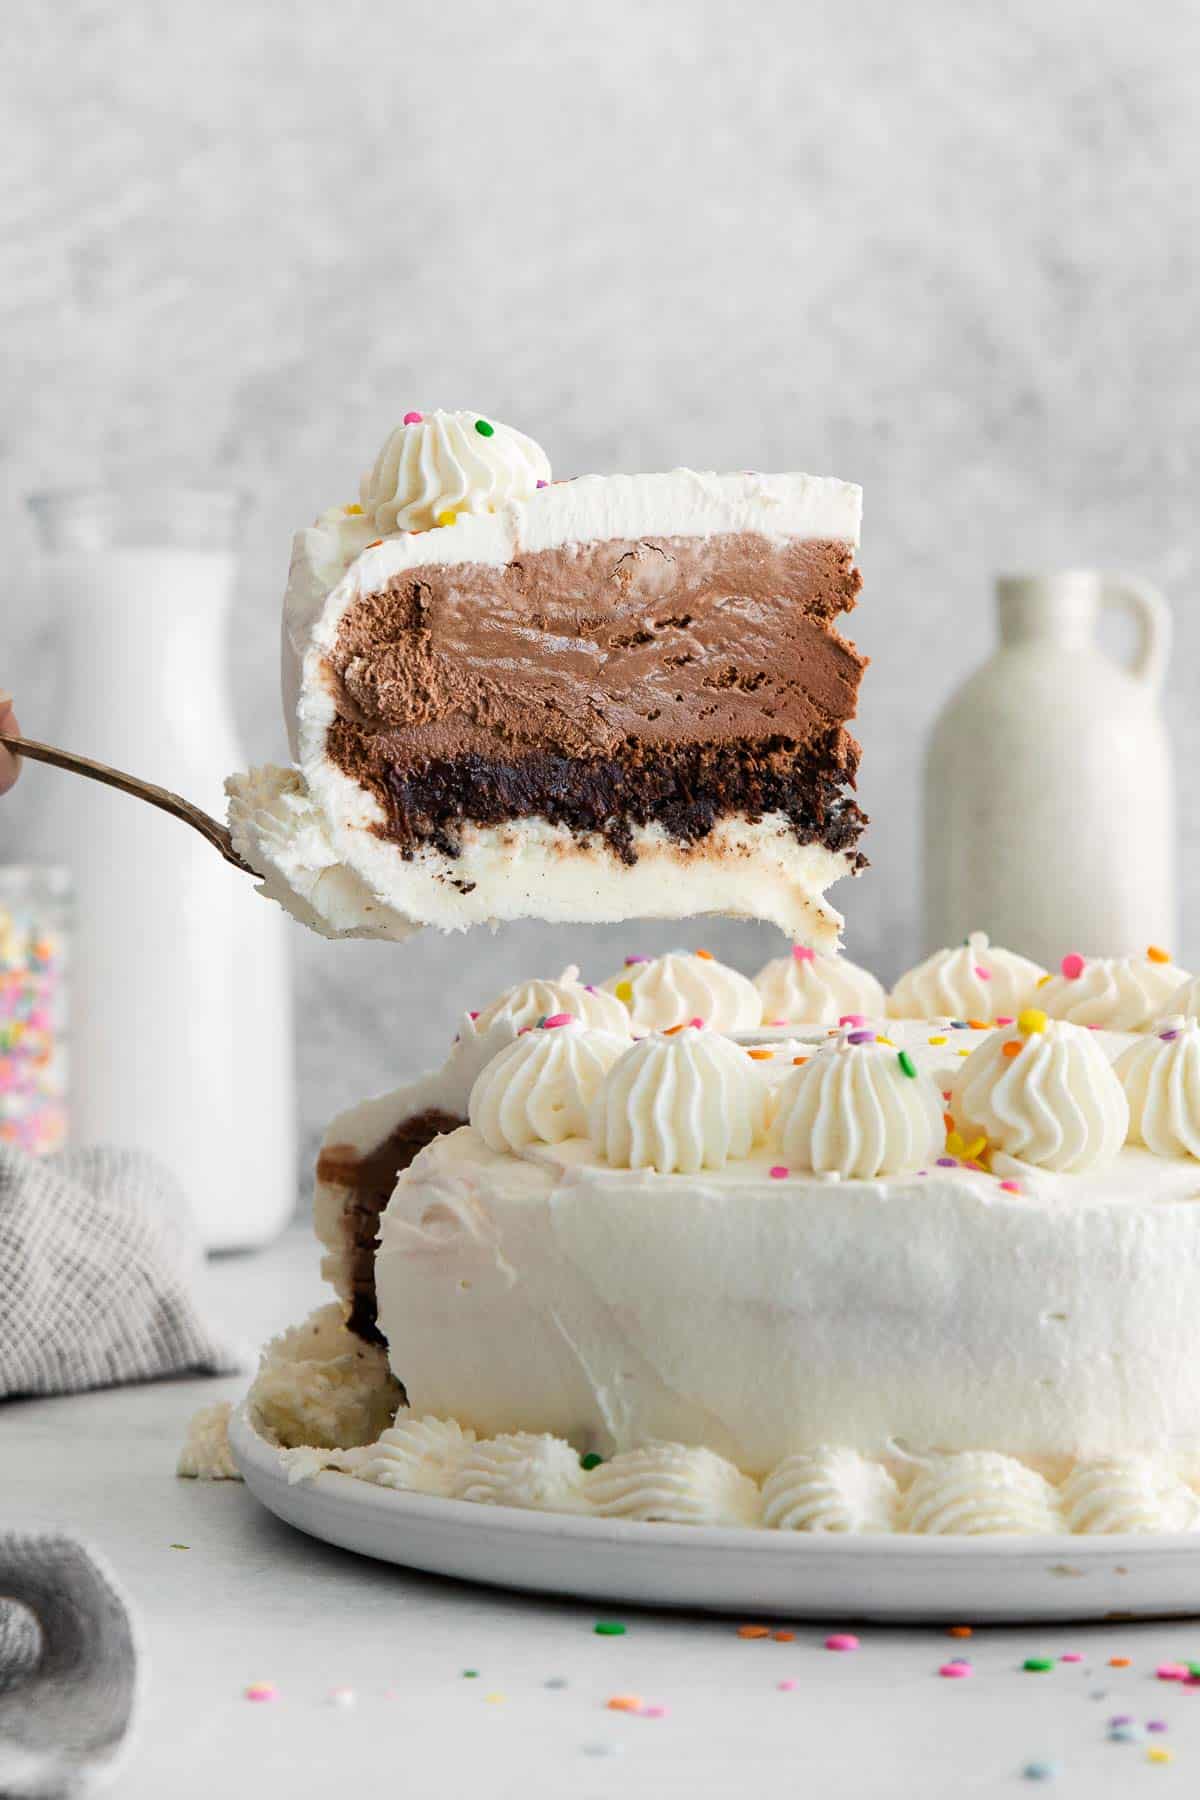 Gluten-free ice cream cake on a counter top, with a slice being taken out of the cake